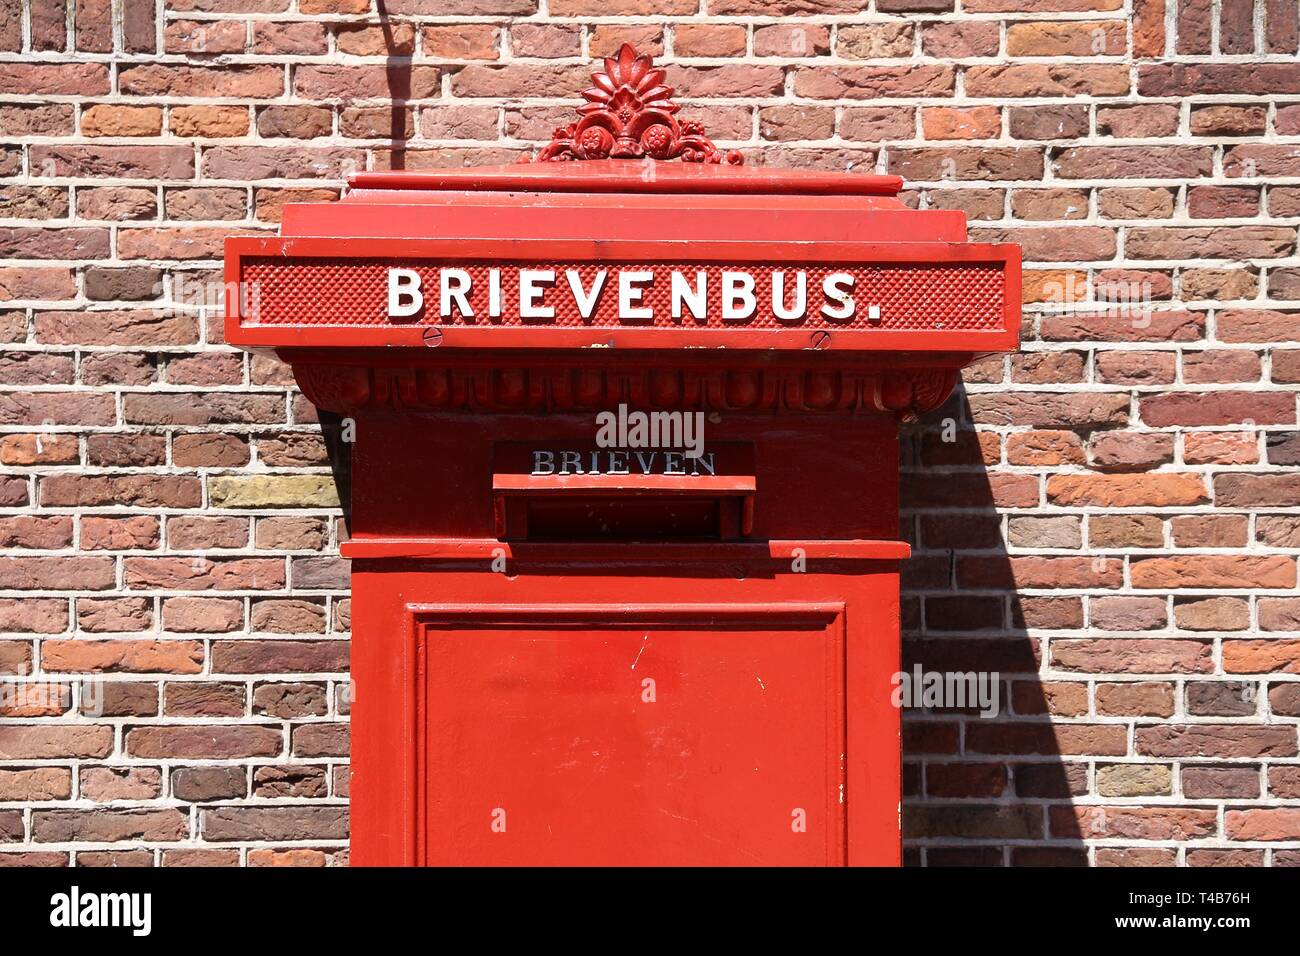 gips Nadenkend motor Red post box in Amsterdam, Netherlands. Brievenbus means letter box in  Dutch Stock Photo - Alamy